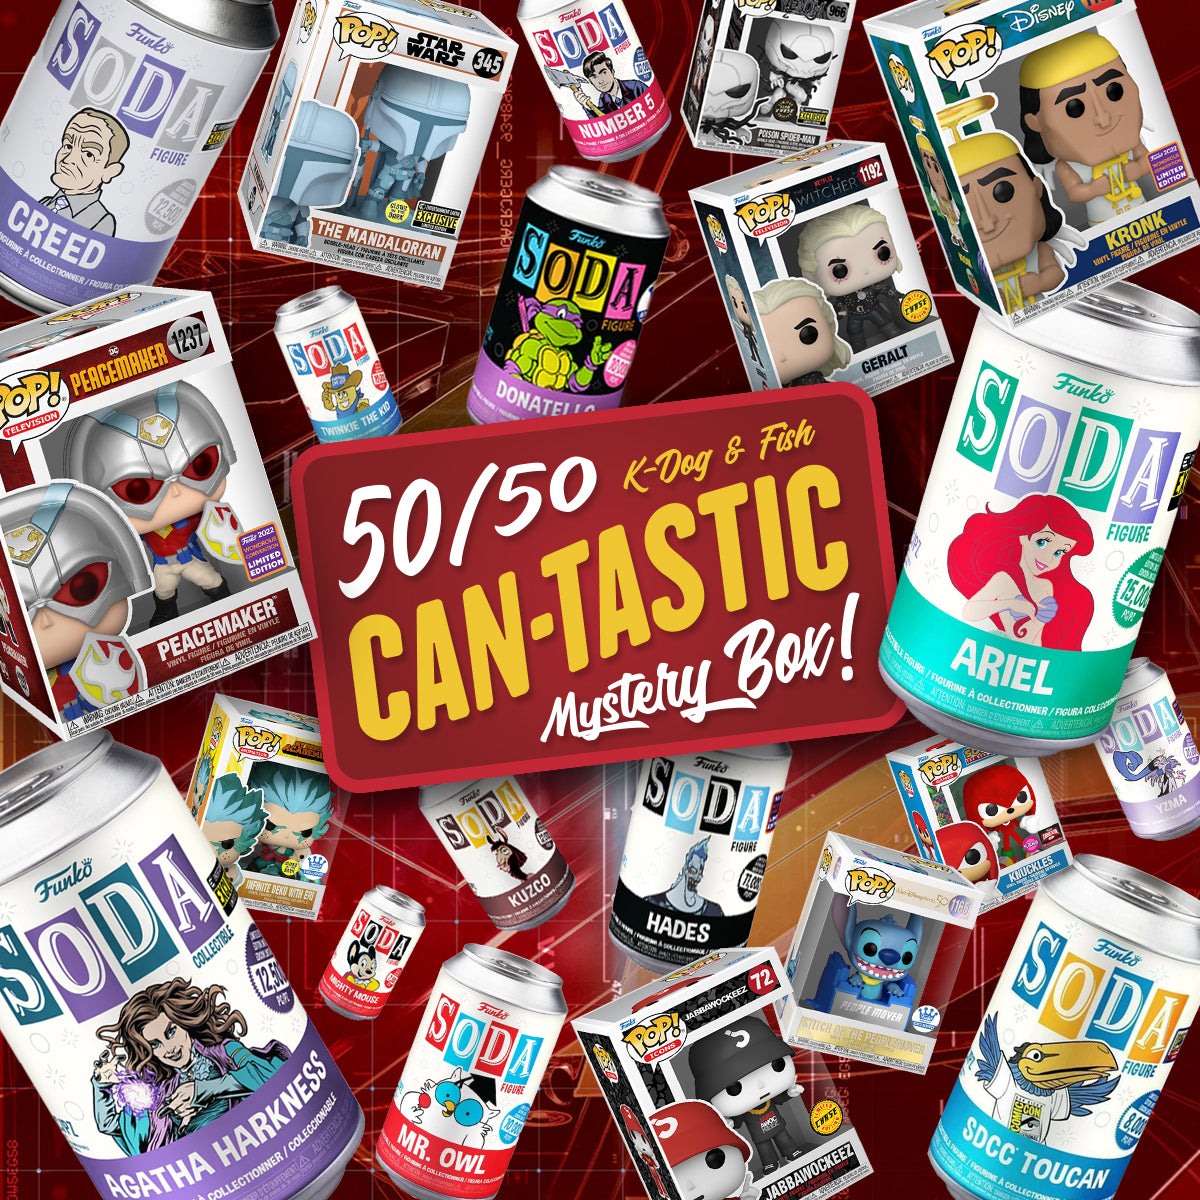 K-DOG & FISH - 50/50 CAN-TASTIC MYSTERY BOX! (SOLD OUT)